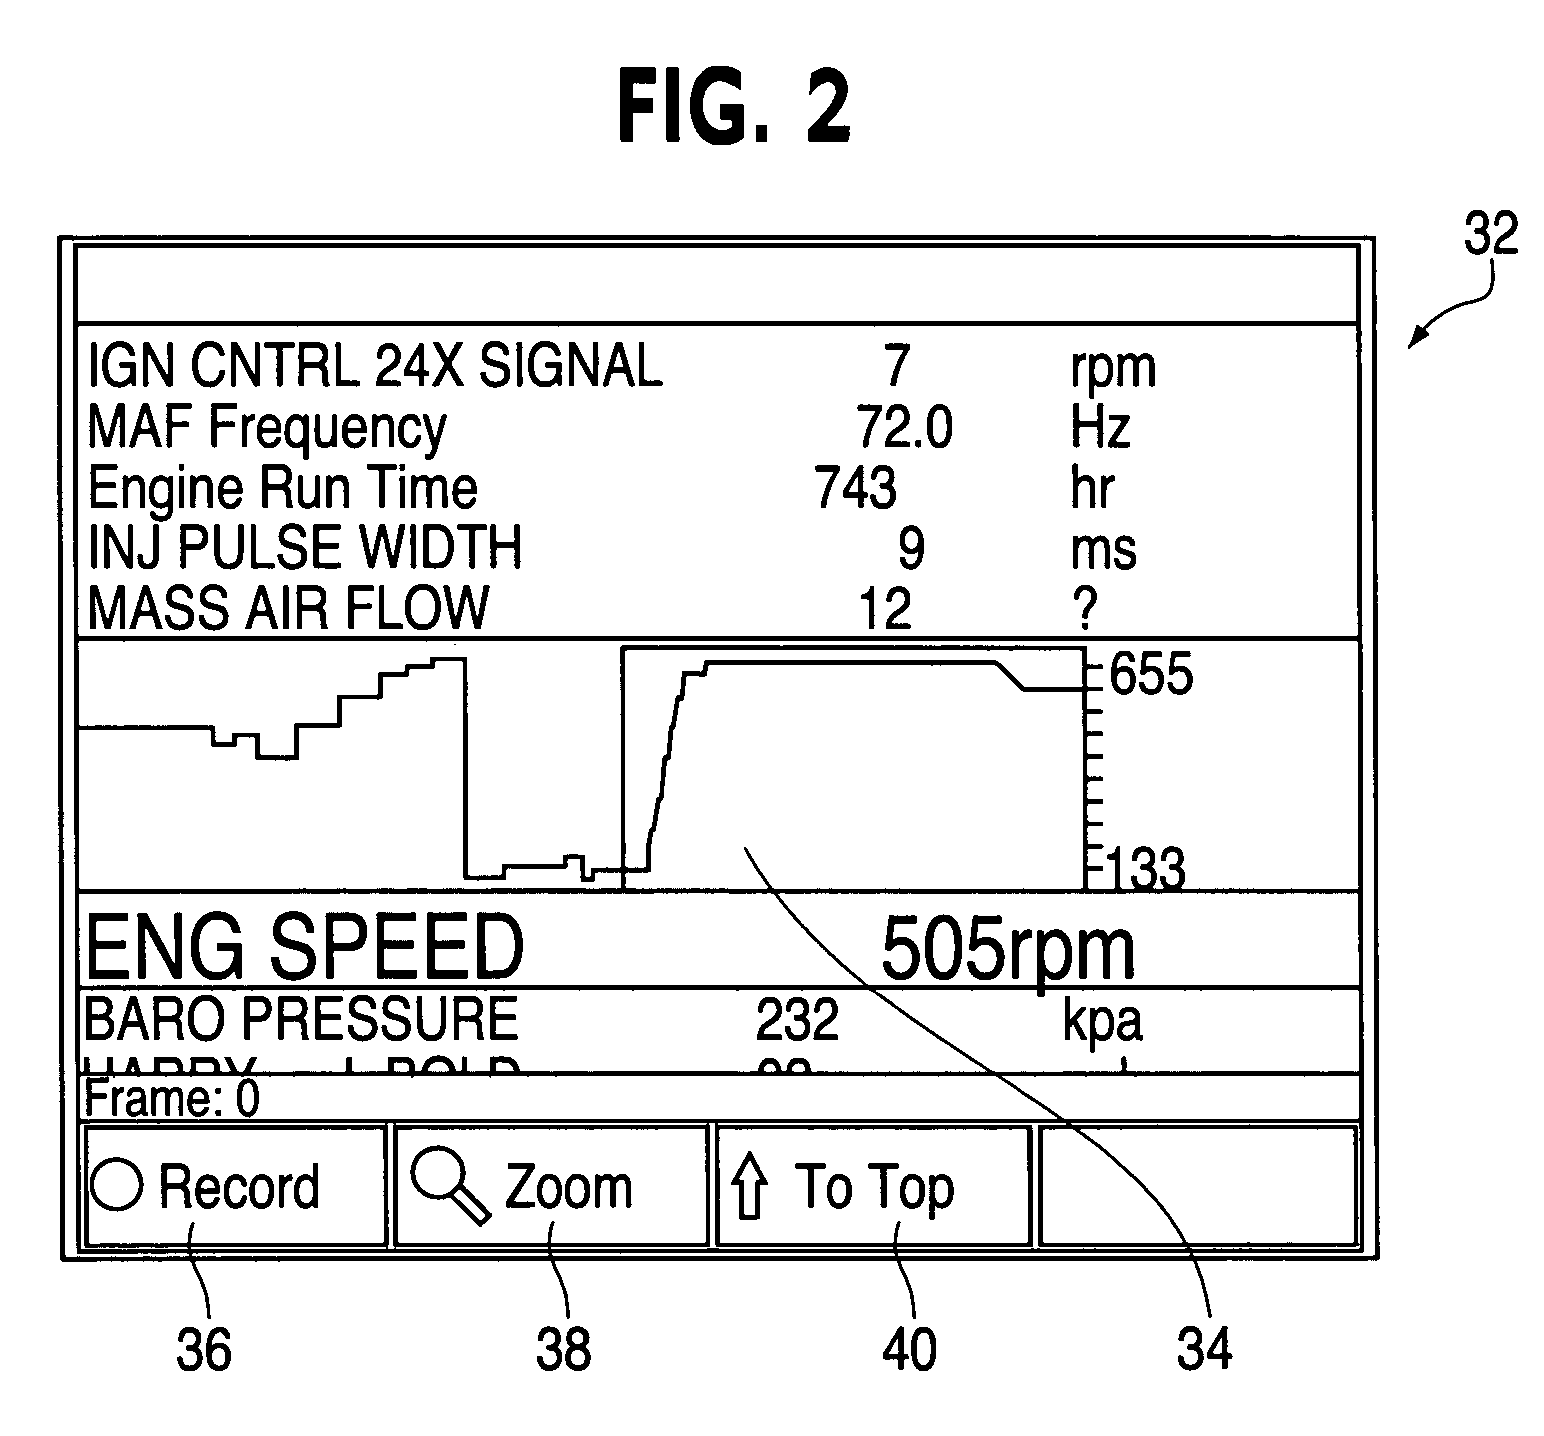 Connectivity between a scan tool and a remote device and method